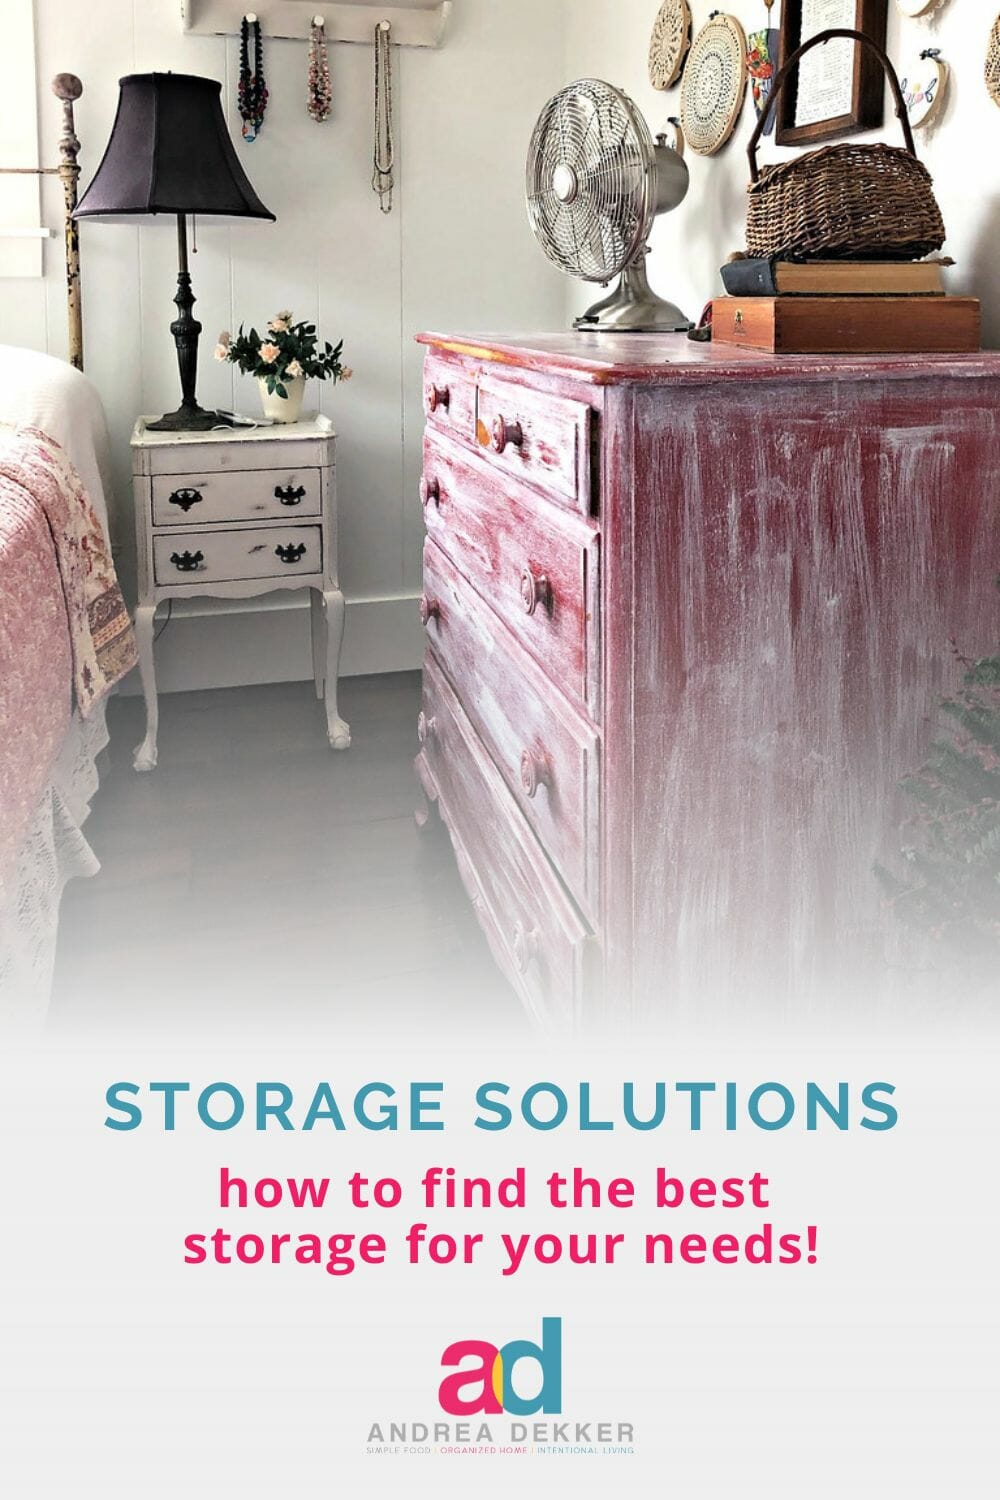 Learn to realize when your current storage isn't working, and how to find the best storage solutions for your home and life! via @andreadekker